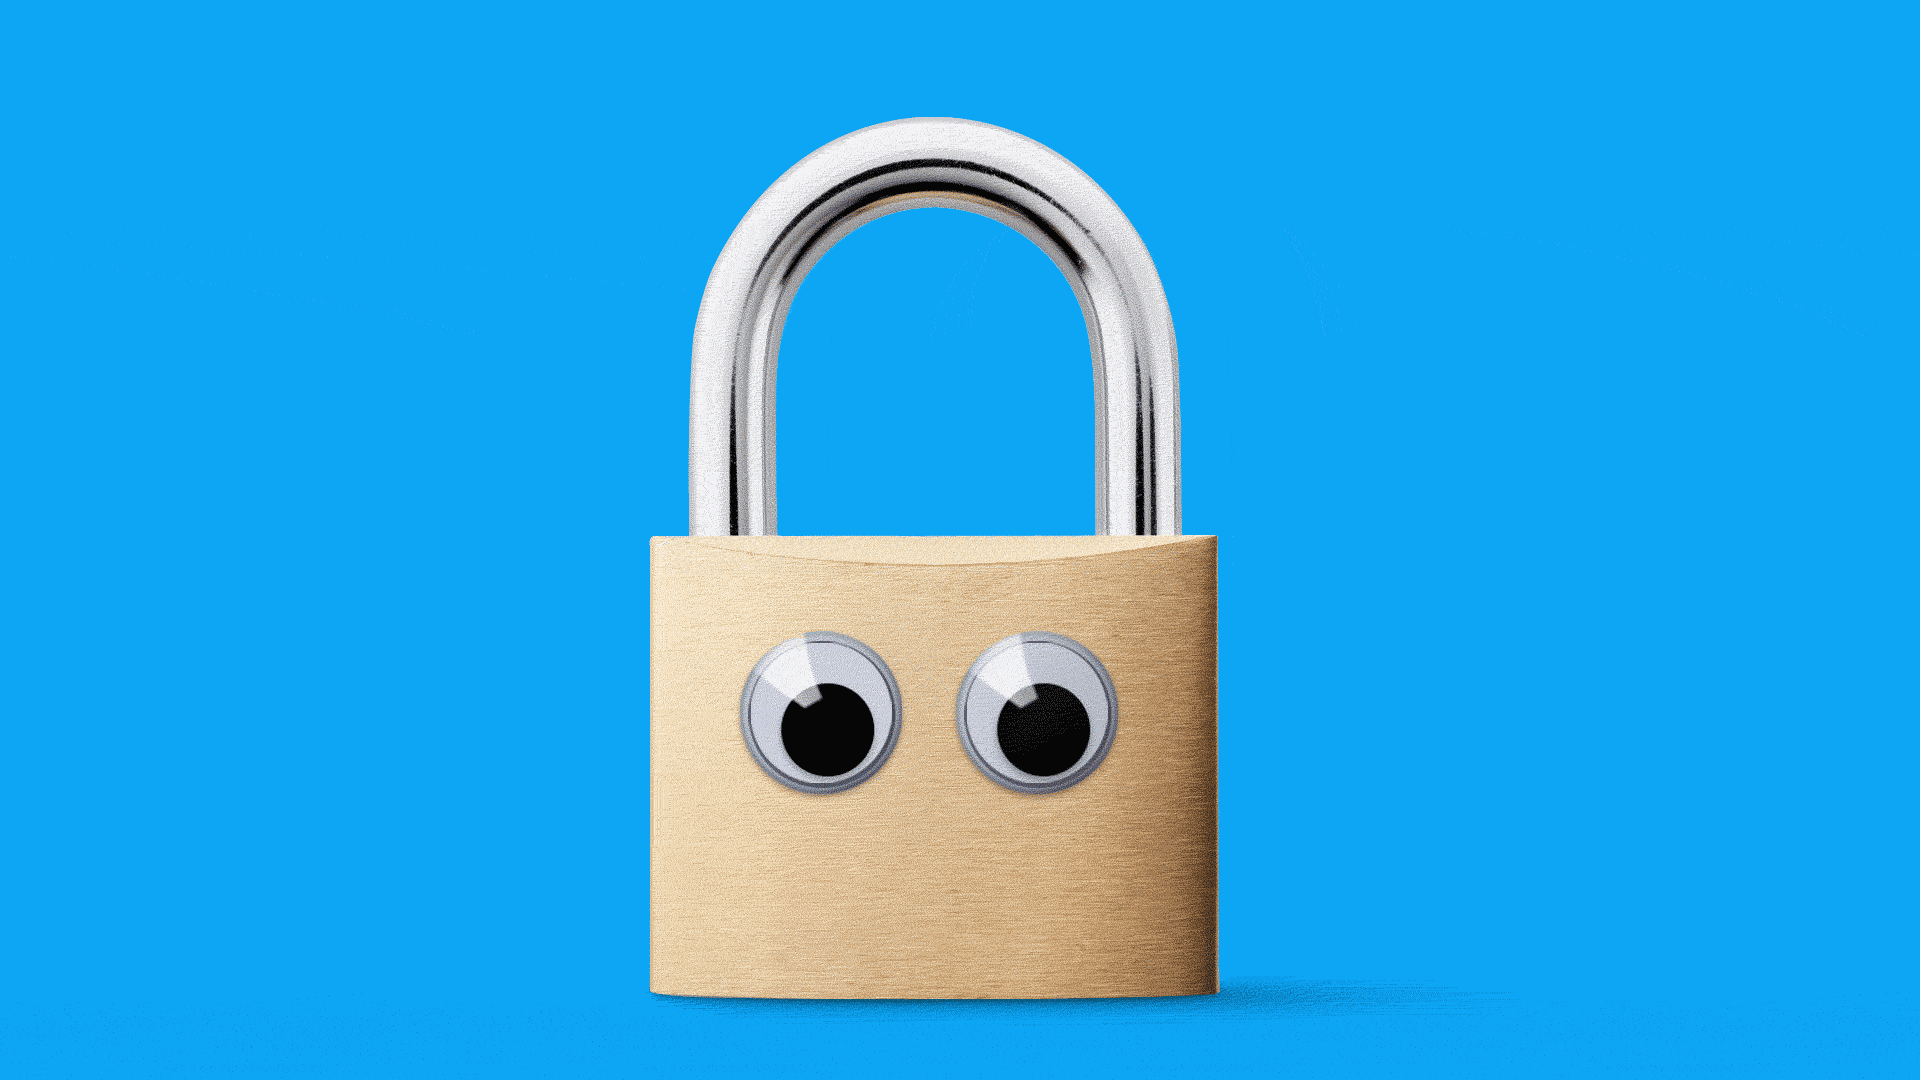 Illustration of a padlock with staring eyes